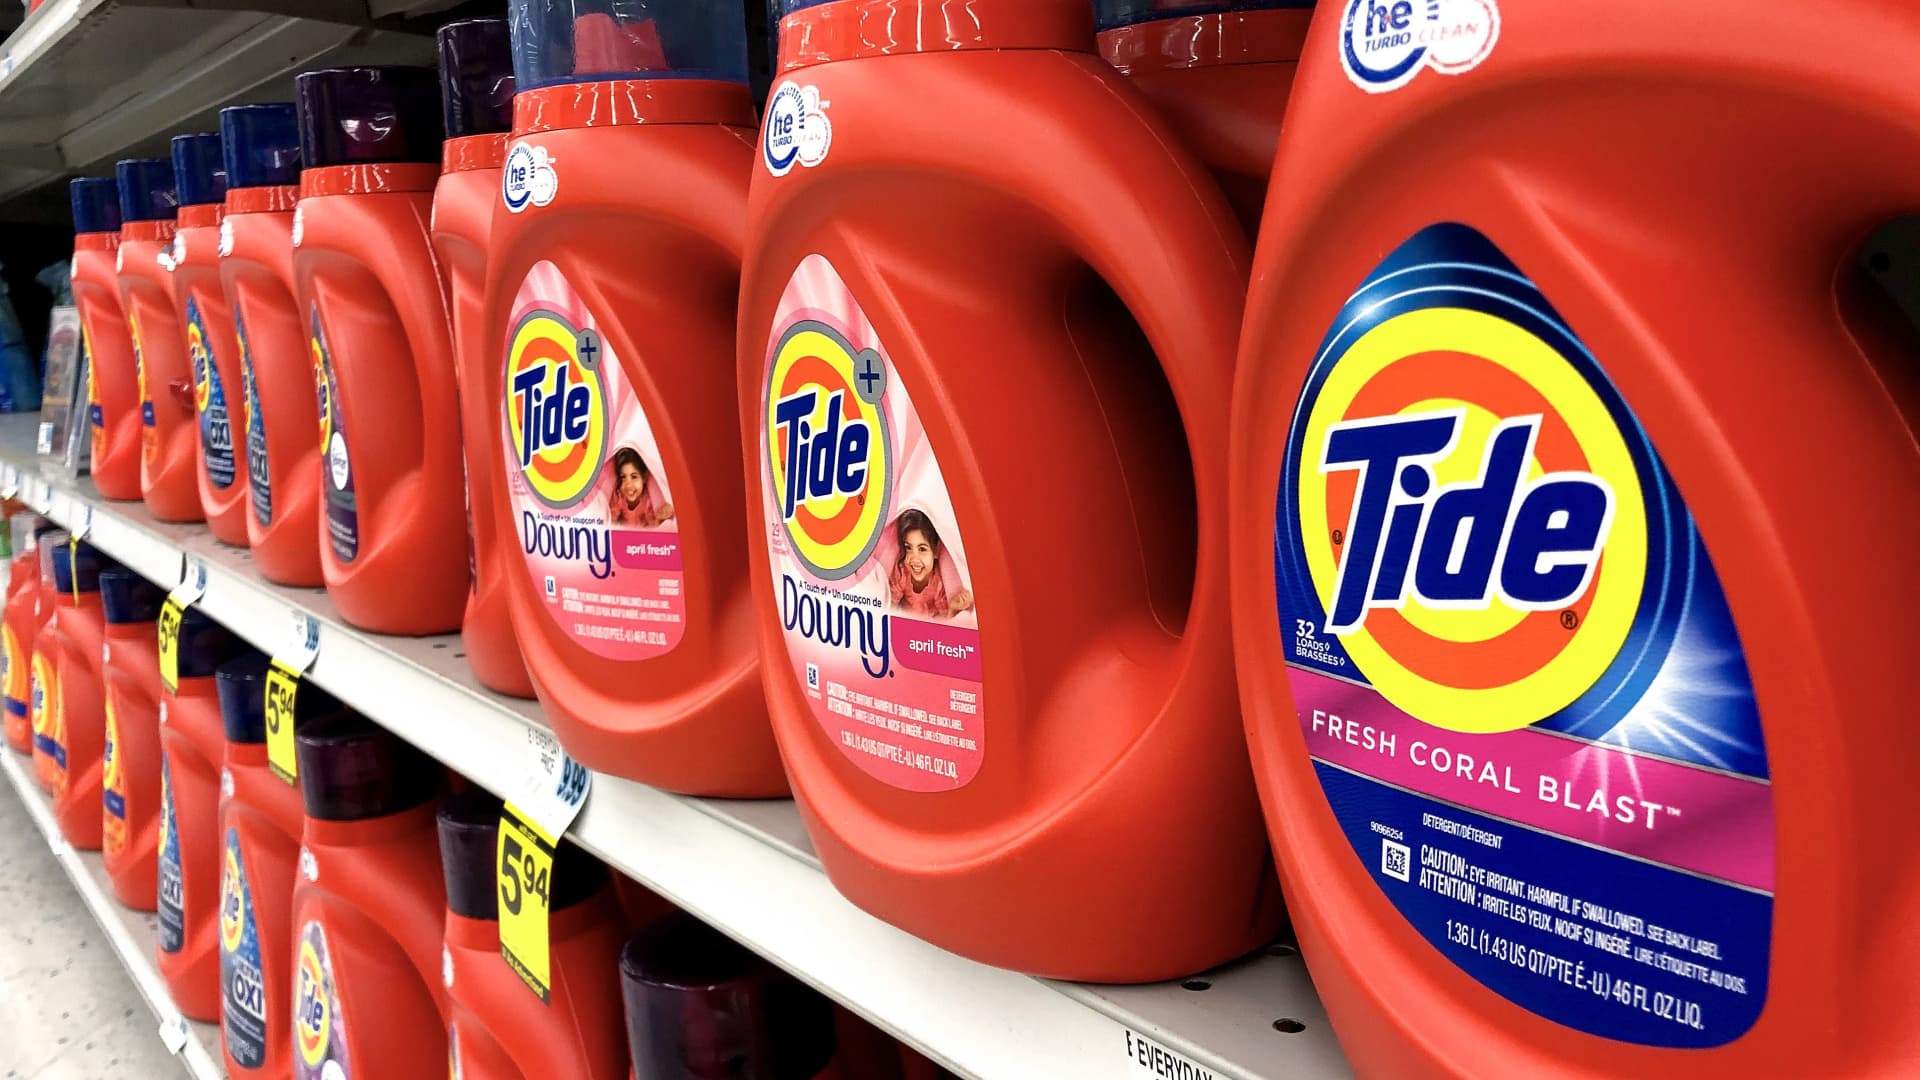 Higher prices help Procter & Gamble offset commodity costs, but Tide maker warns of more challenges - CNBC